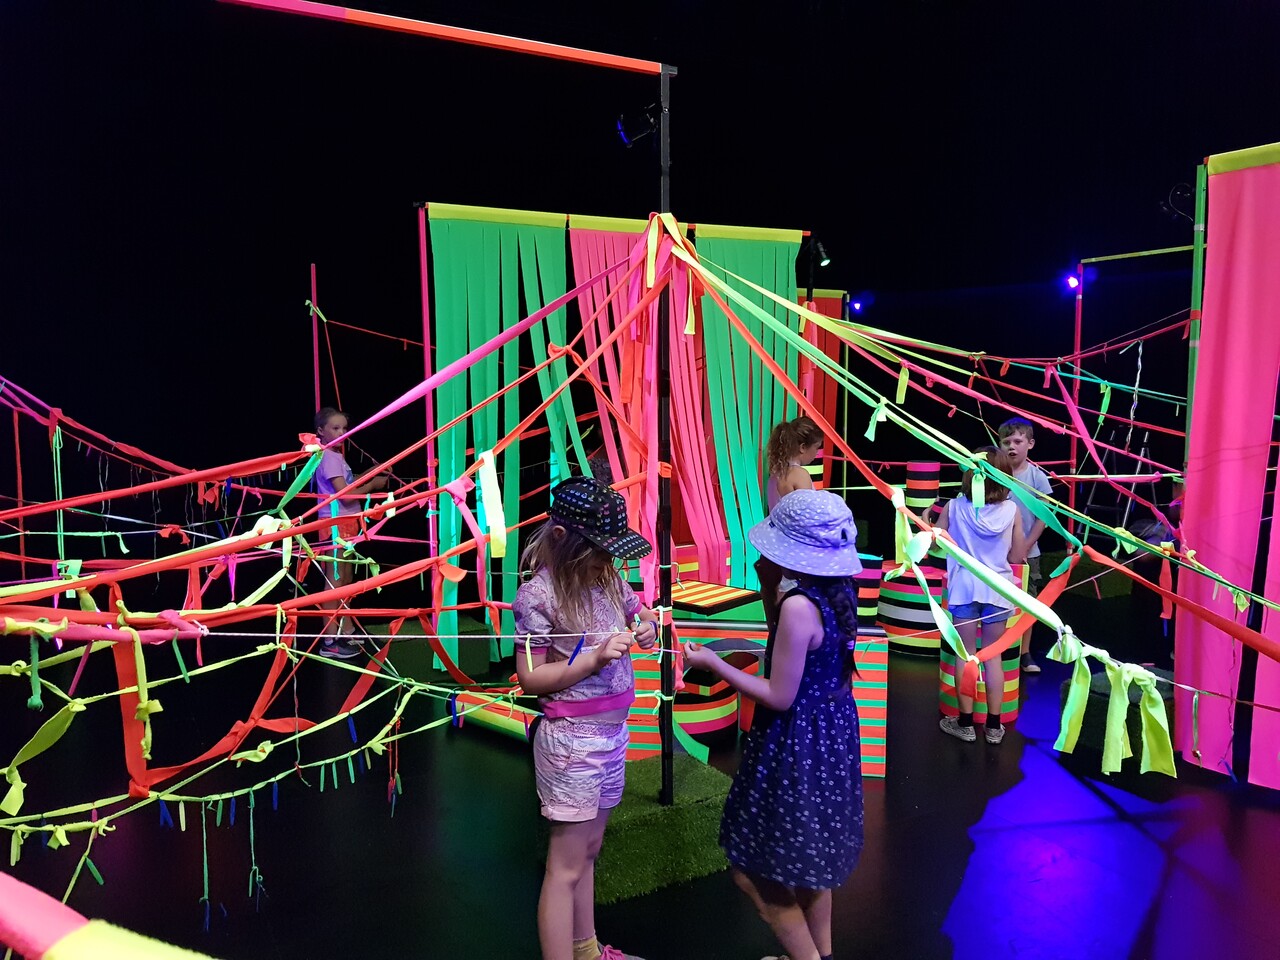 Image: School Holiday Arts Program, 2019, photographed by Beth McMahon